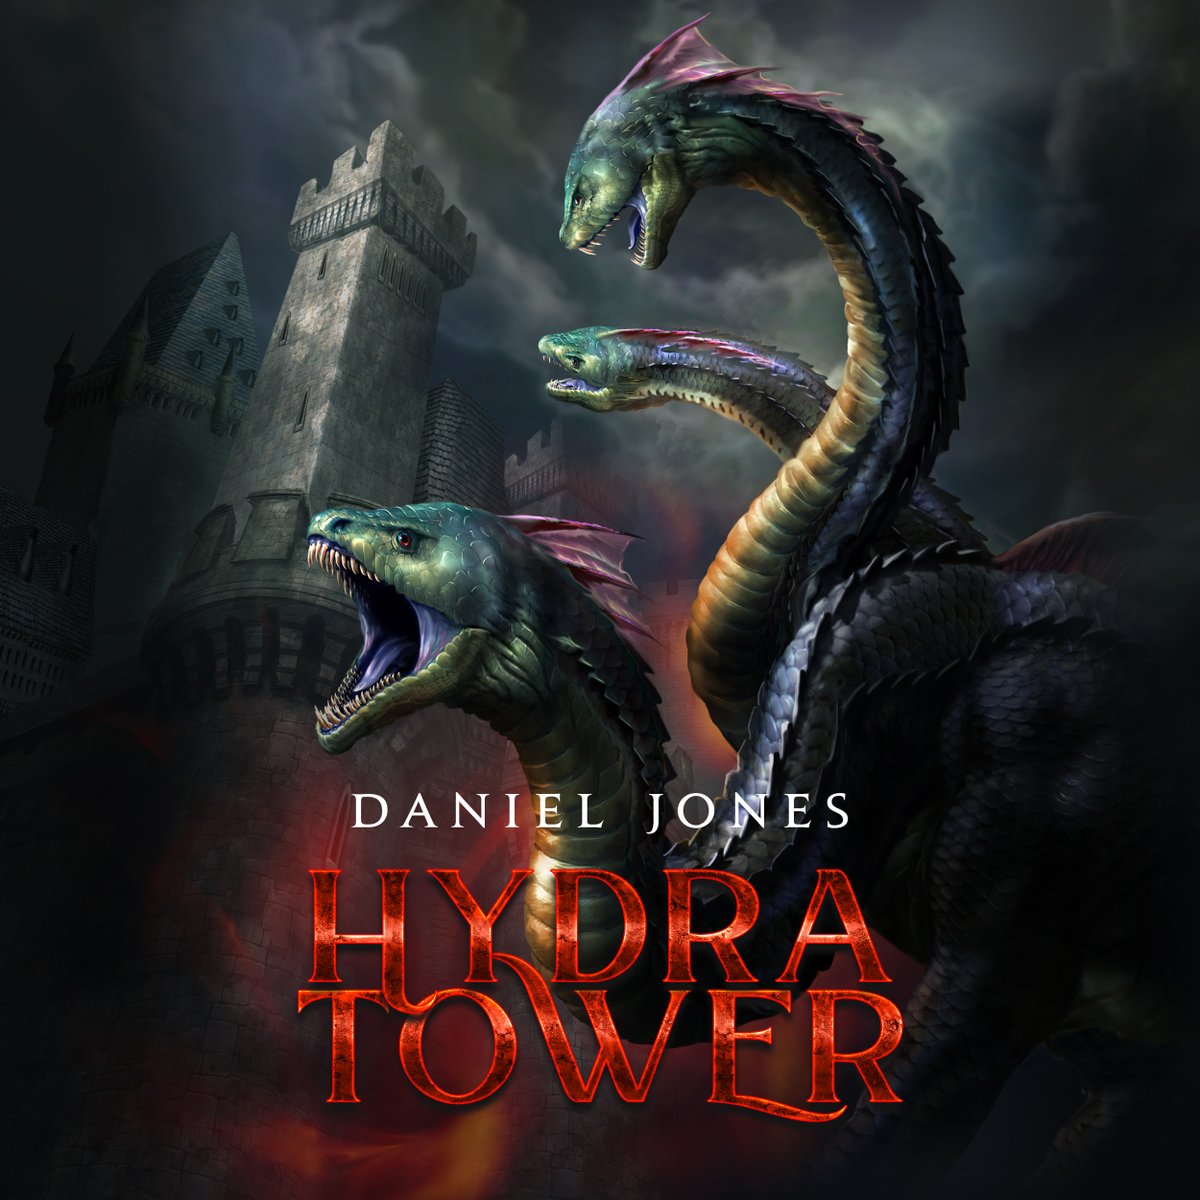 @hemm_writers The hydra attacks in 12 days!

Preorder your copy of Hydra Tower today!
amazon.com/dp/B0BN19K6MV